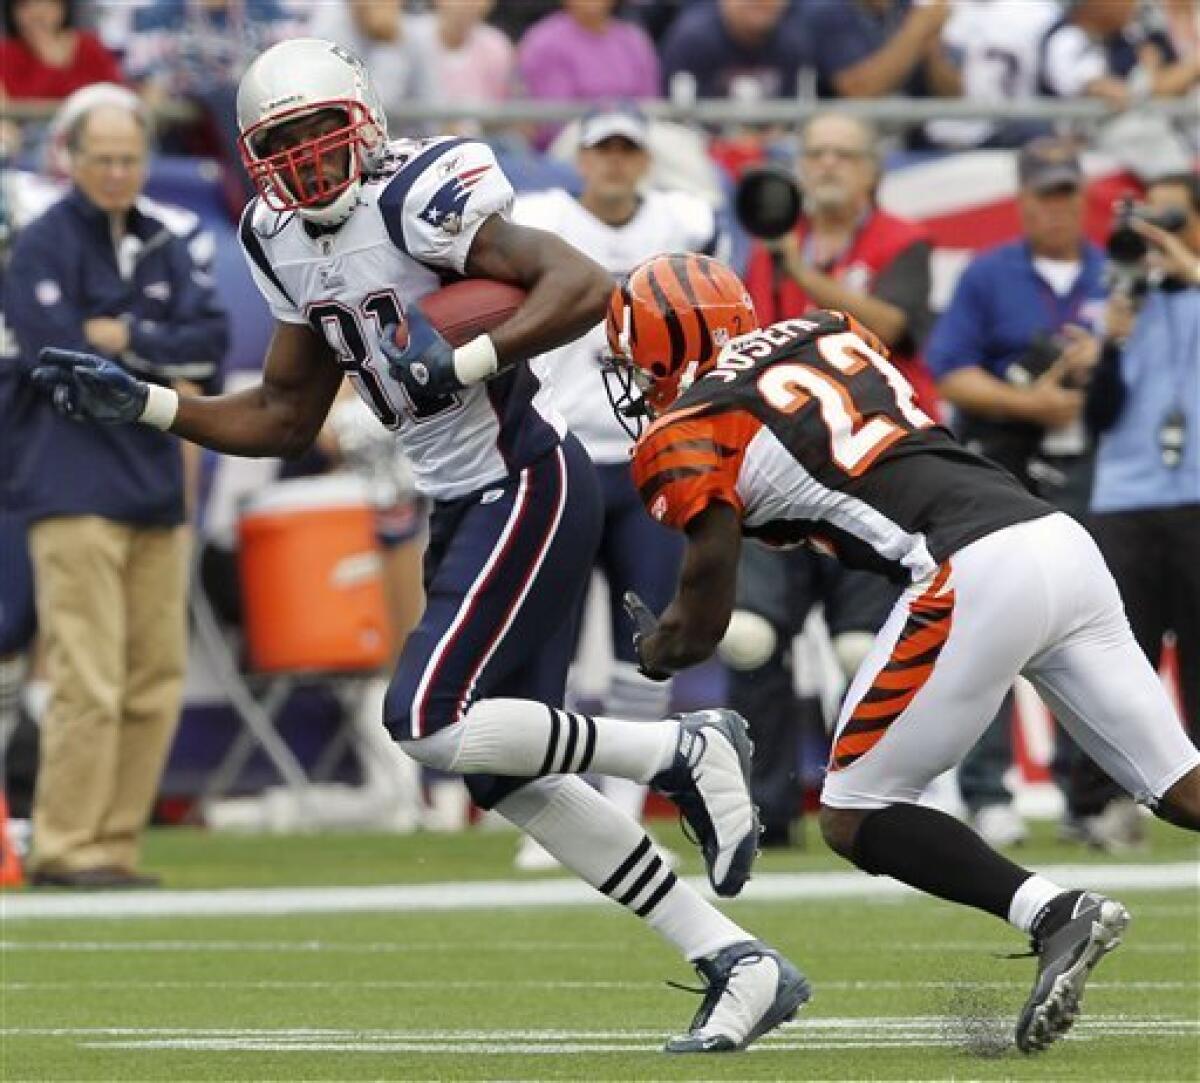 New England Patriots wide receiver Randy Moss (81) catches a pass